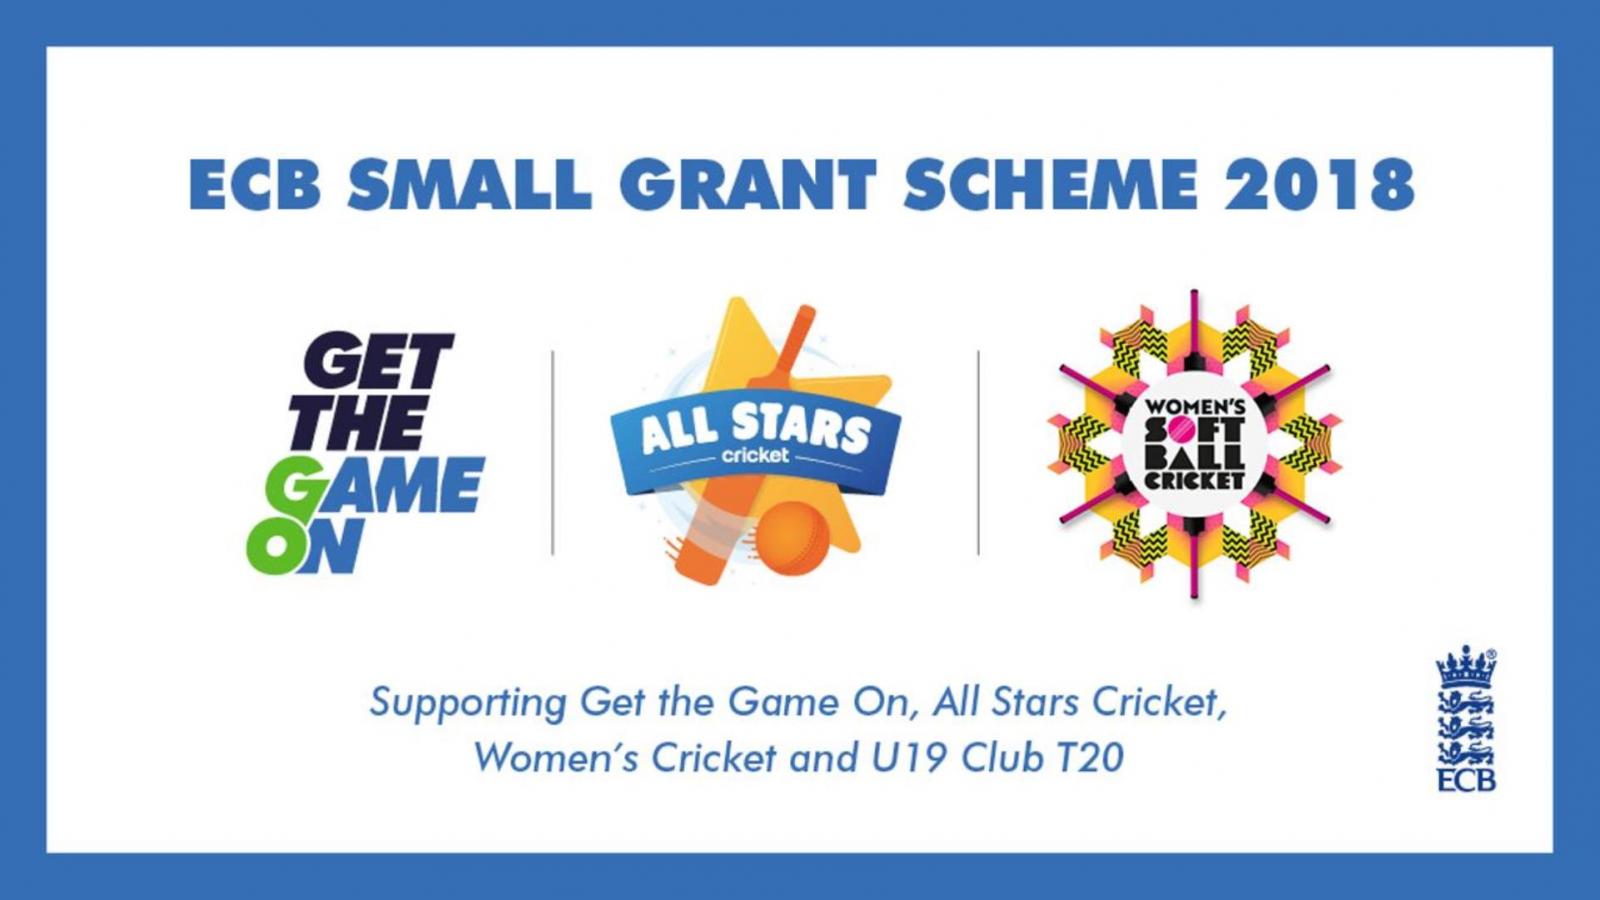 Devon clubs can apply for up to Â£4,000 following the launch of the 2018 ECB Small Grant Scheme.